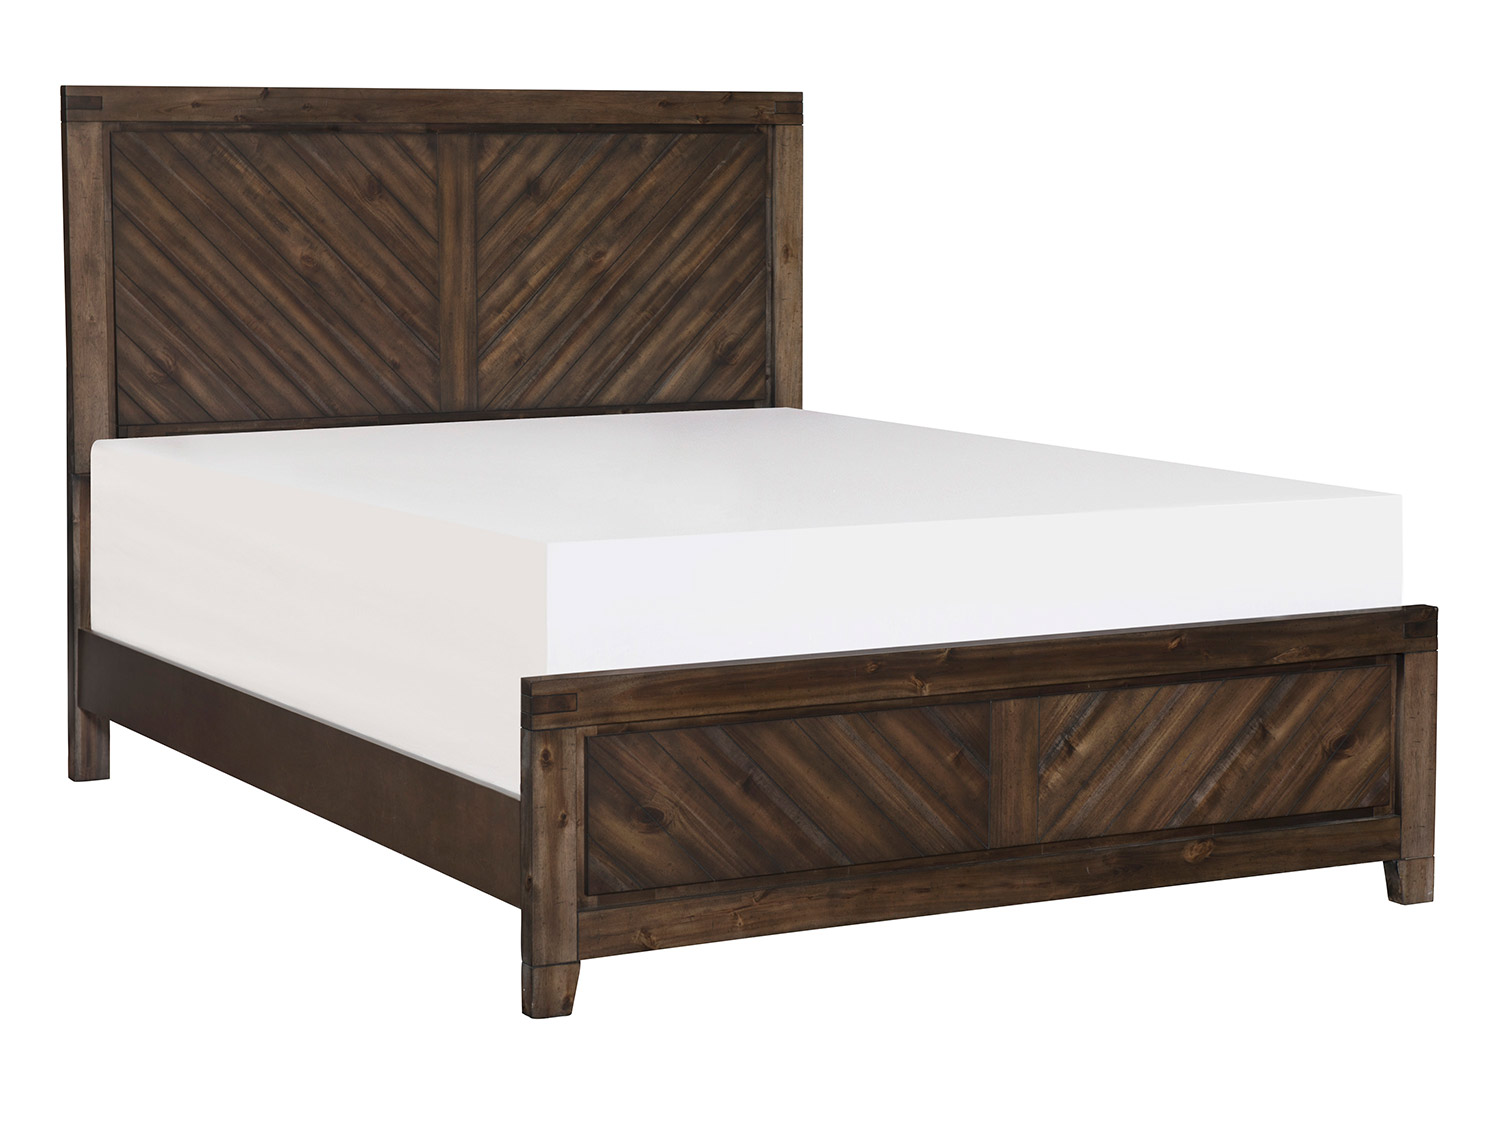 Homelegance Parnell Bed - Rustic Cherry